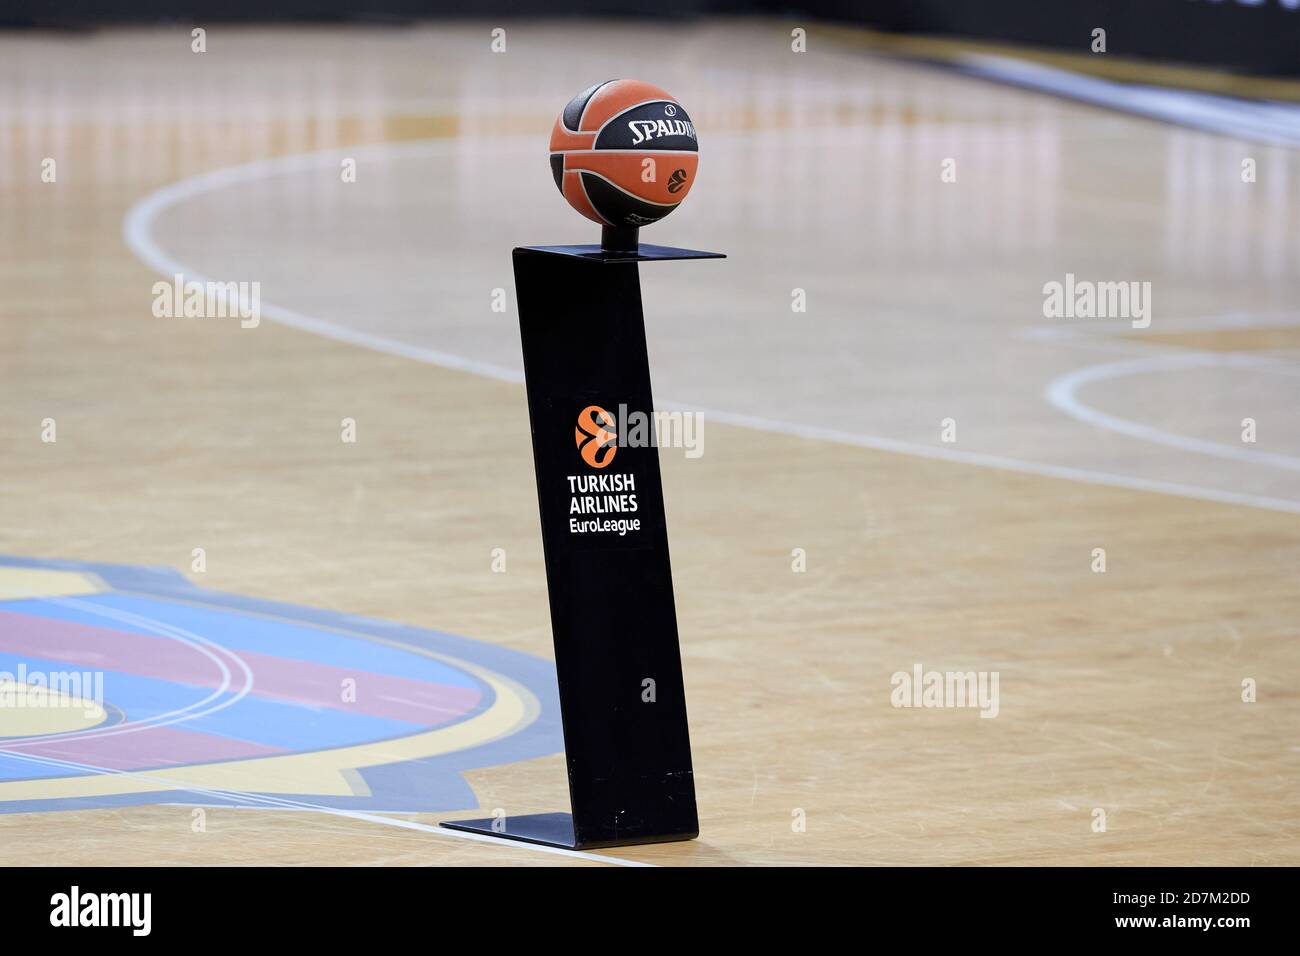 Barcelona, Spain. 23rd Oct 2020. Ball presentation during the Turkish Airlines EuroLeague match between FC Barcelona and Real Madrid at Palau Blaugrana on October 23, 2020 in Barcelona, Spain. Credit: Dax Images/Alamy Live News Stock Photo